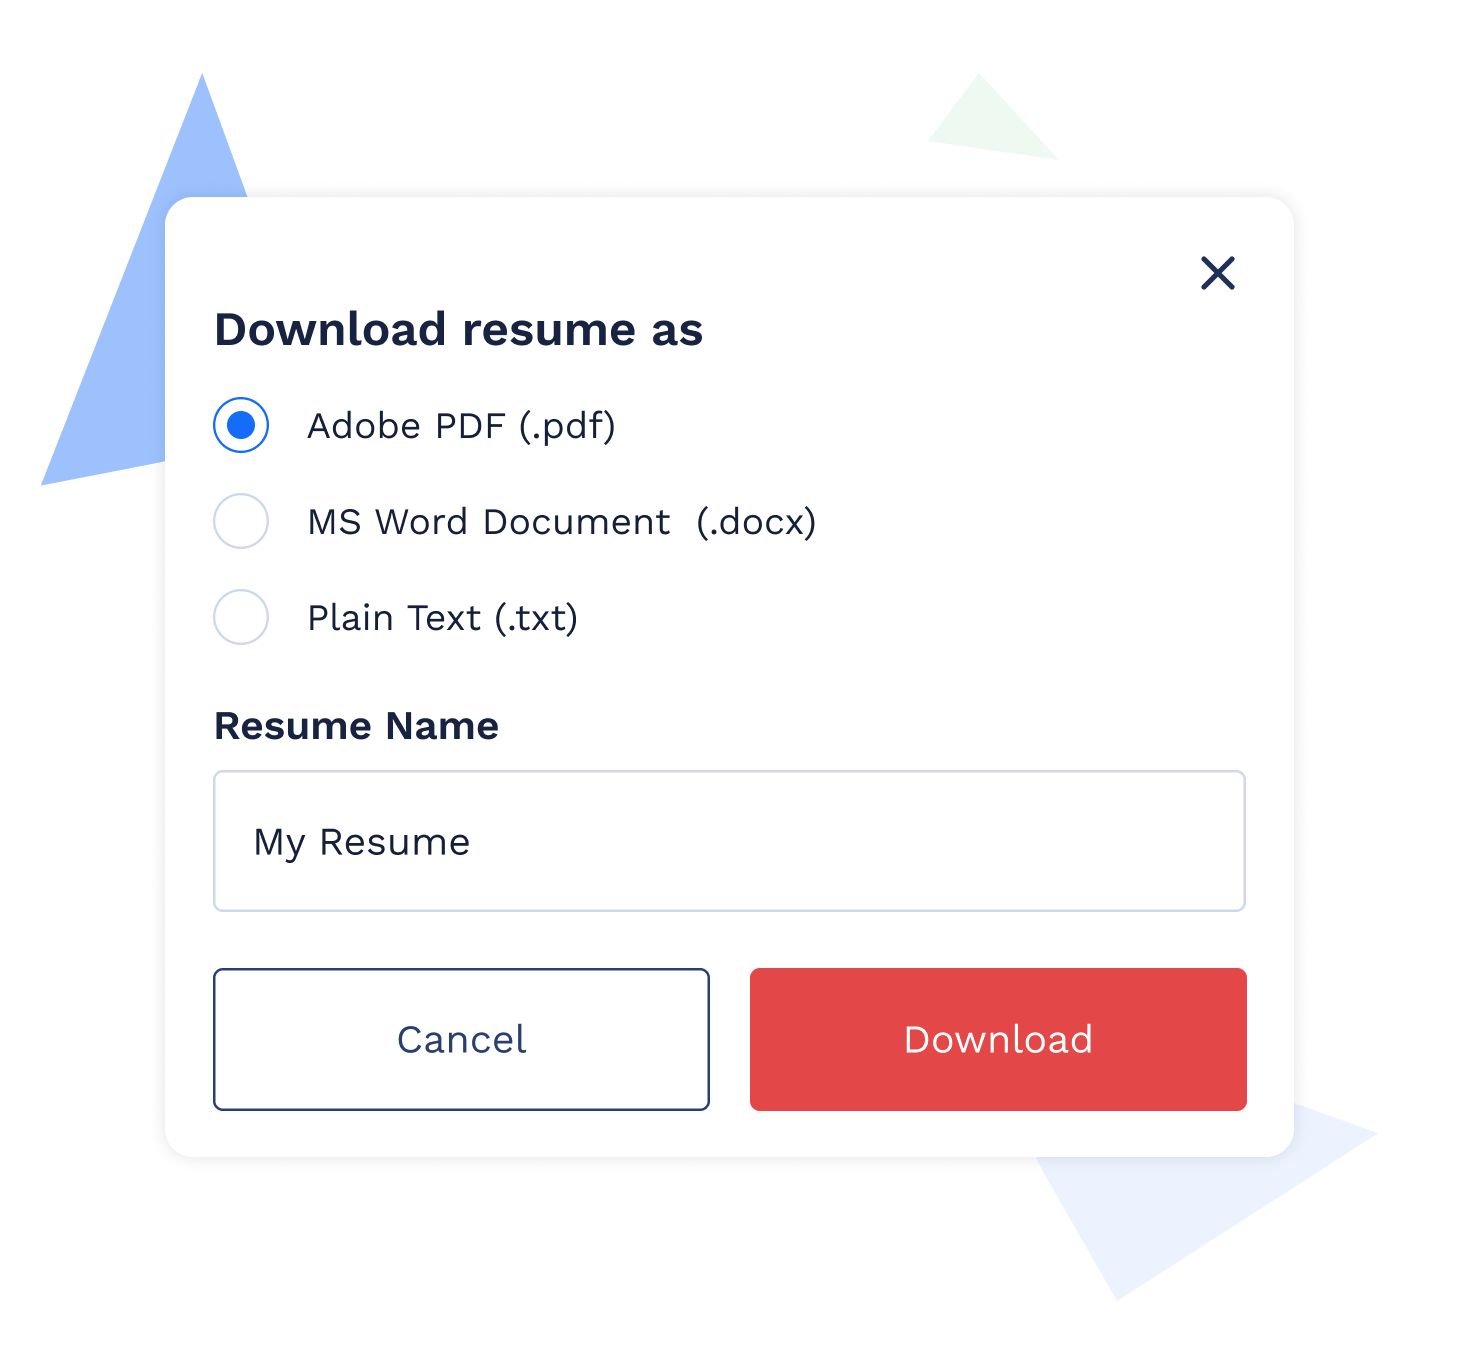 Unlimited document downloads